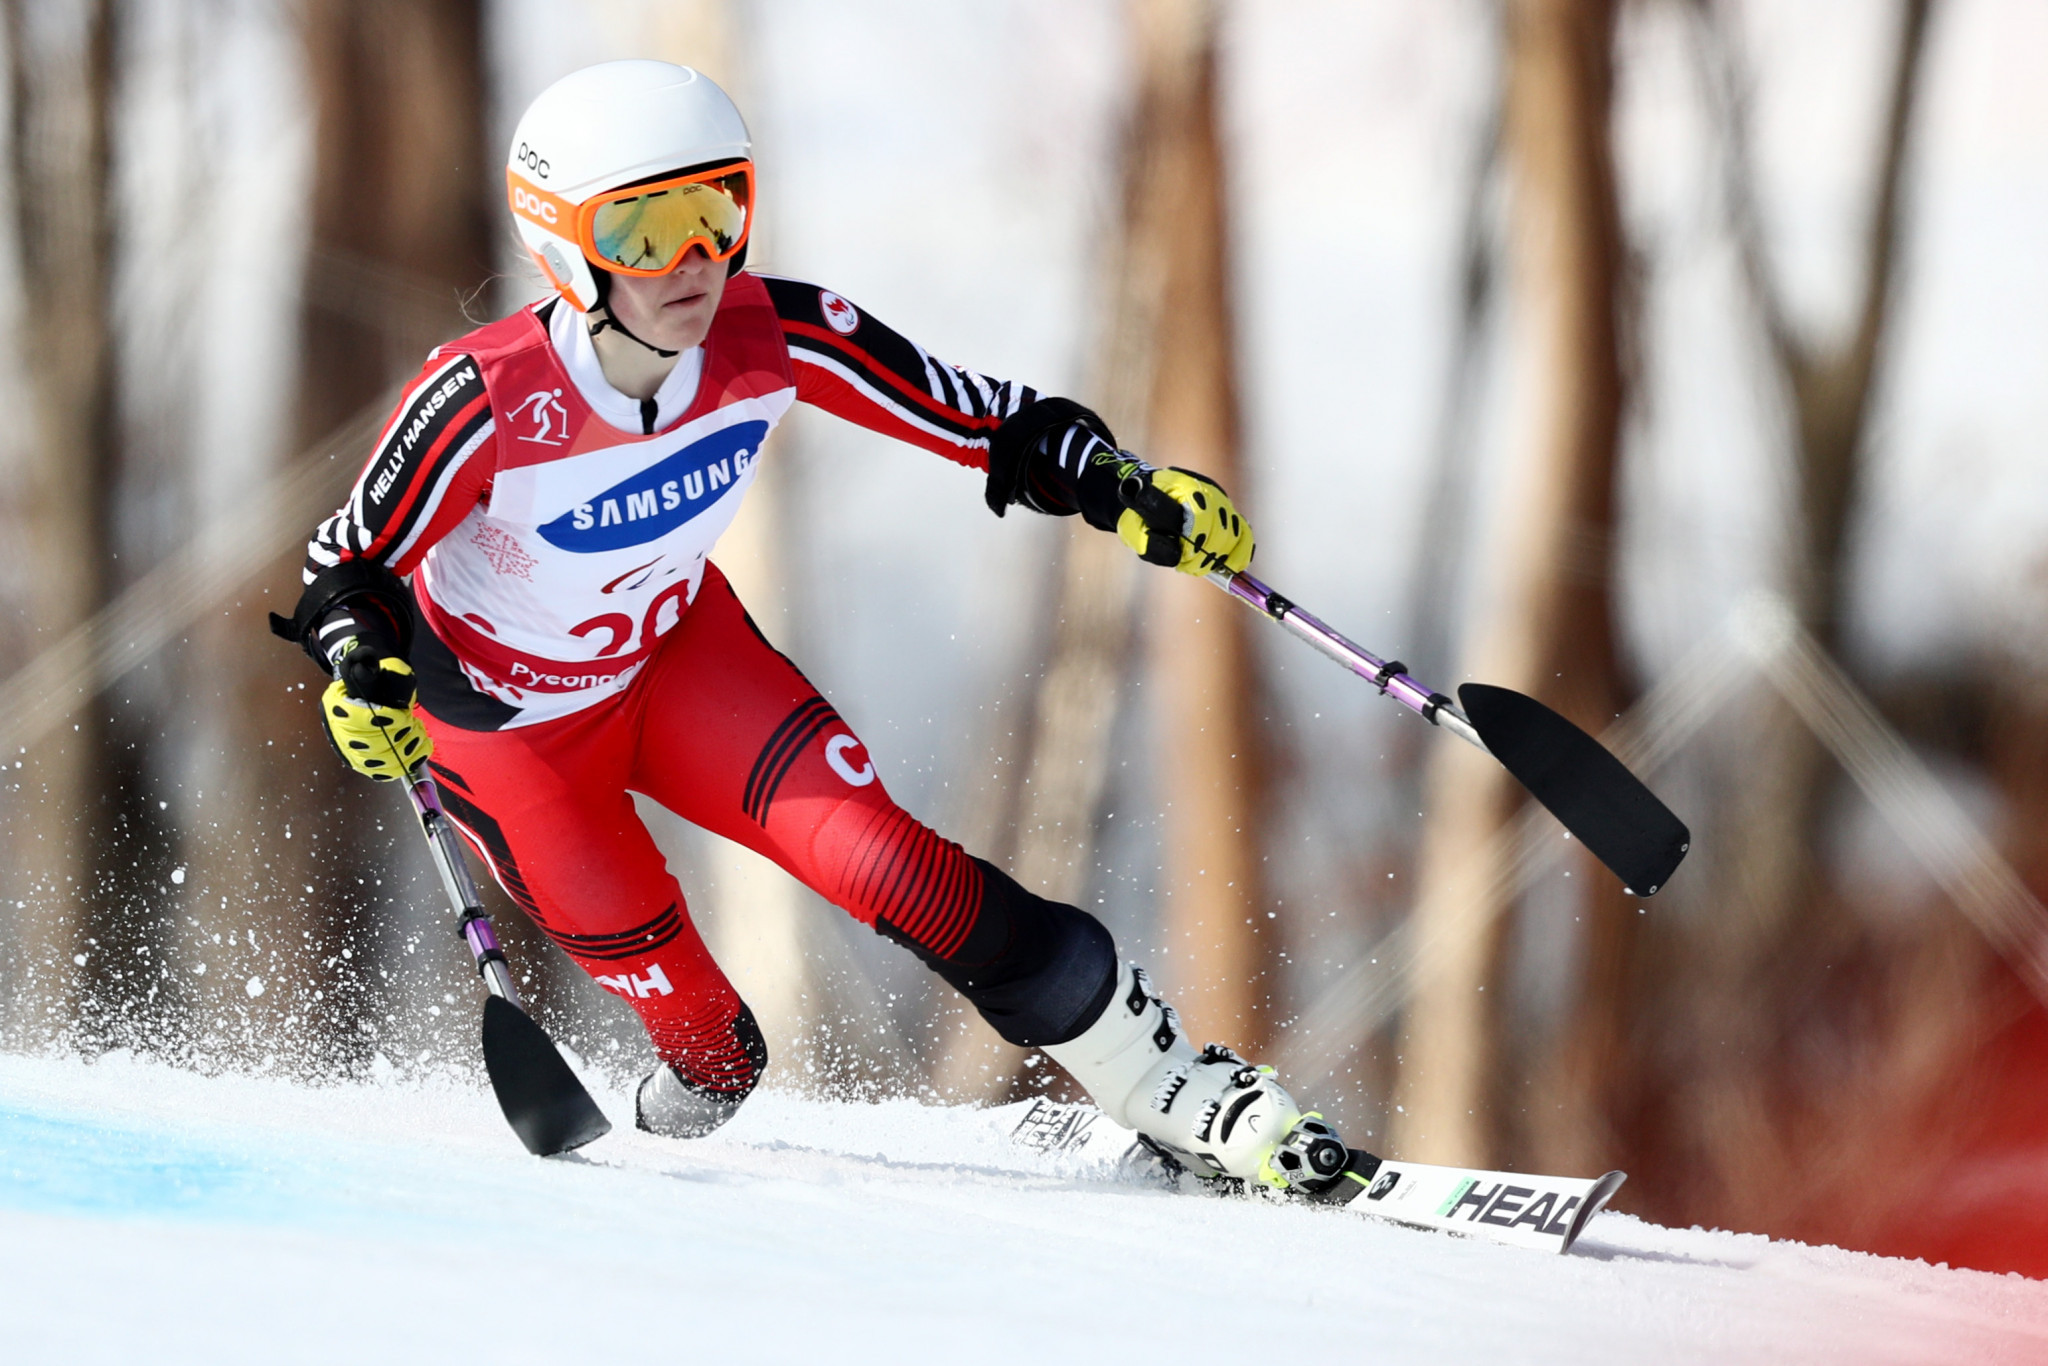 Canada's Frederique Turgeon came second in the vote after winning three medals at the World Para Alpine Skiing Championships shortly after the death of his father ©Getty Images